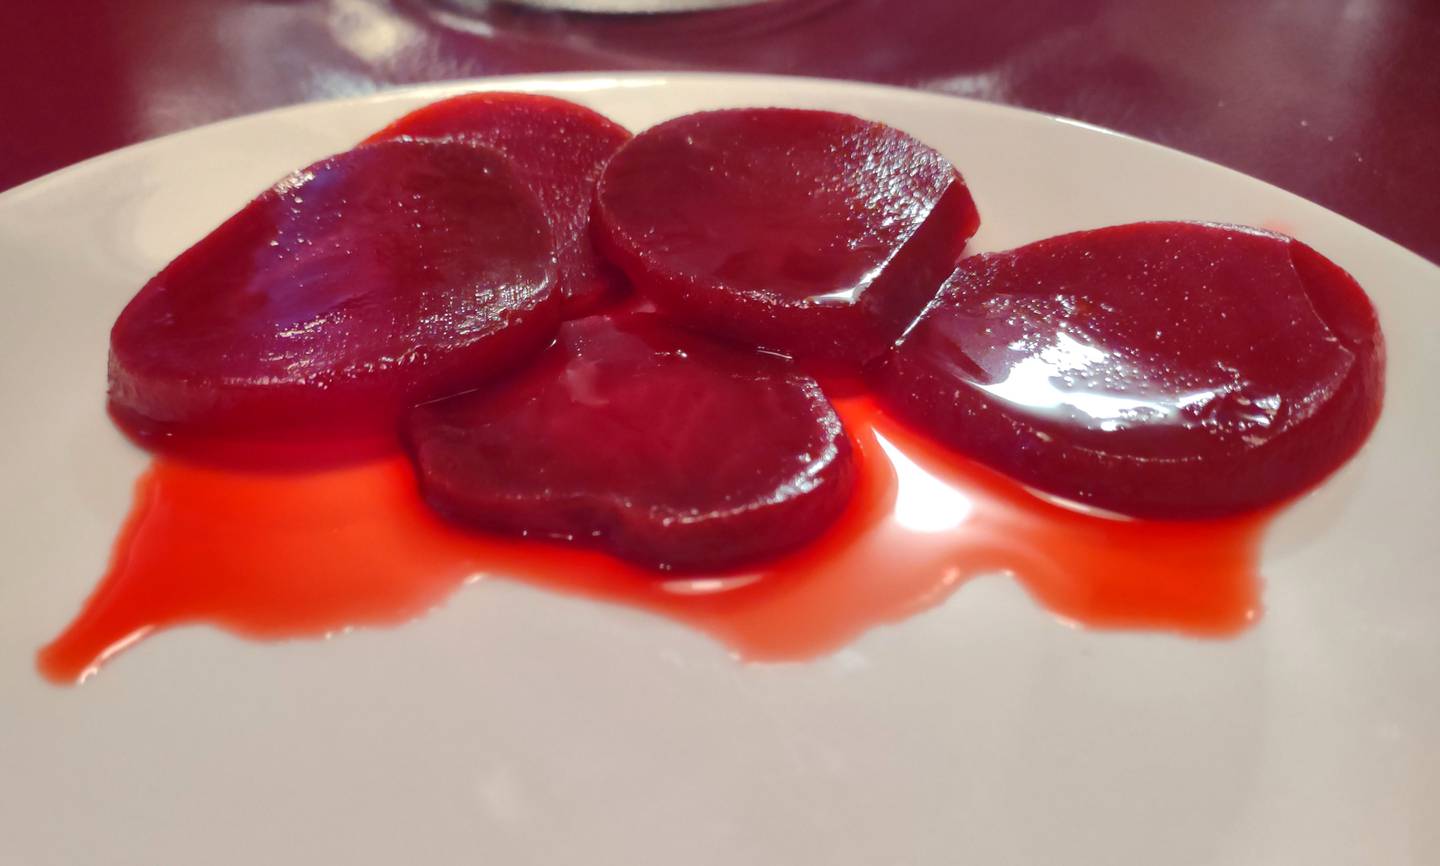 Pickled beets are one of the options available on the salad bar at Softails Bar and Grill in Ladd. The salad bar is complimentary with most dinner orders.